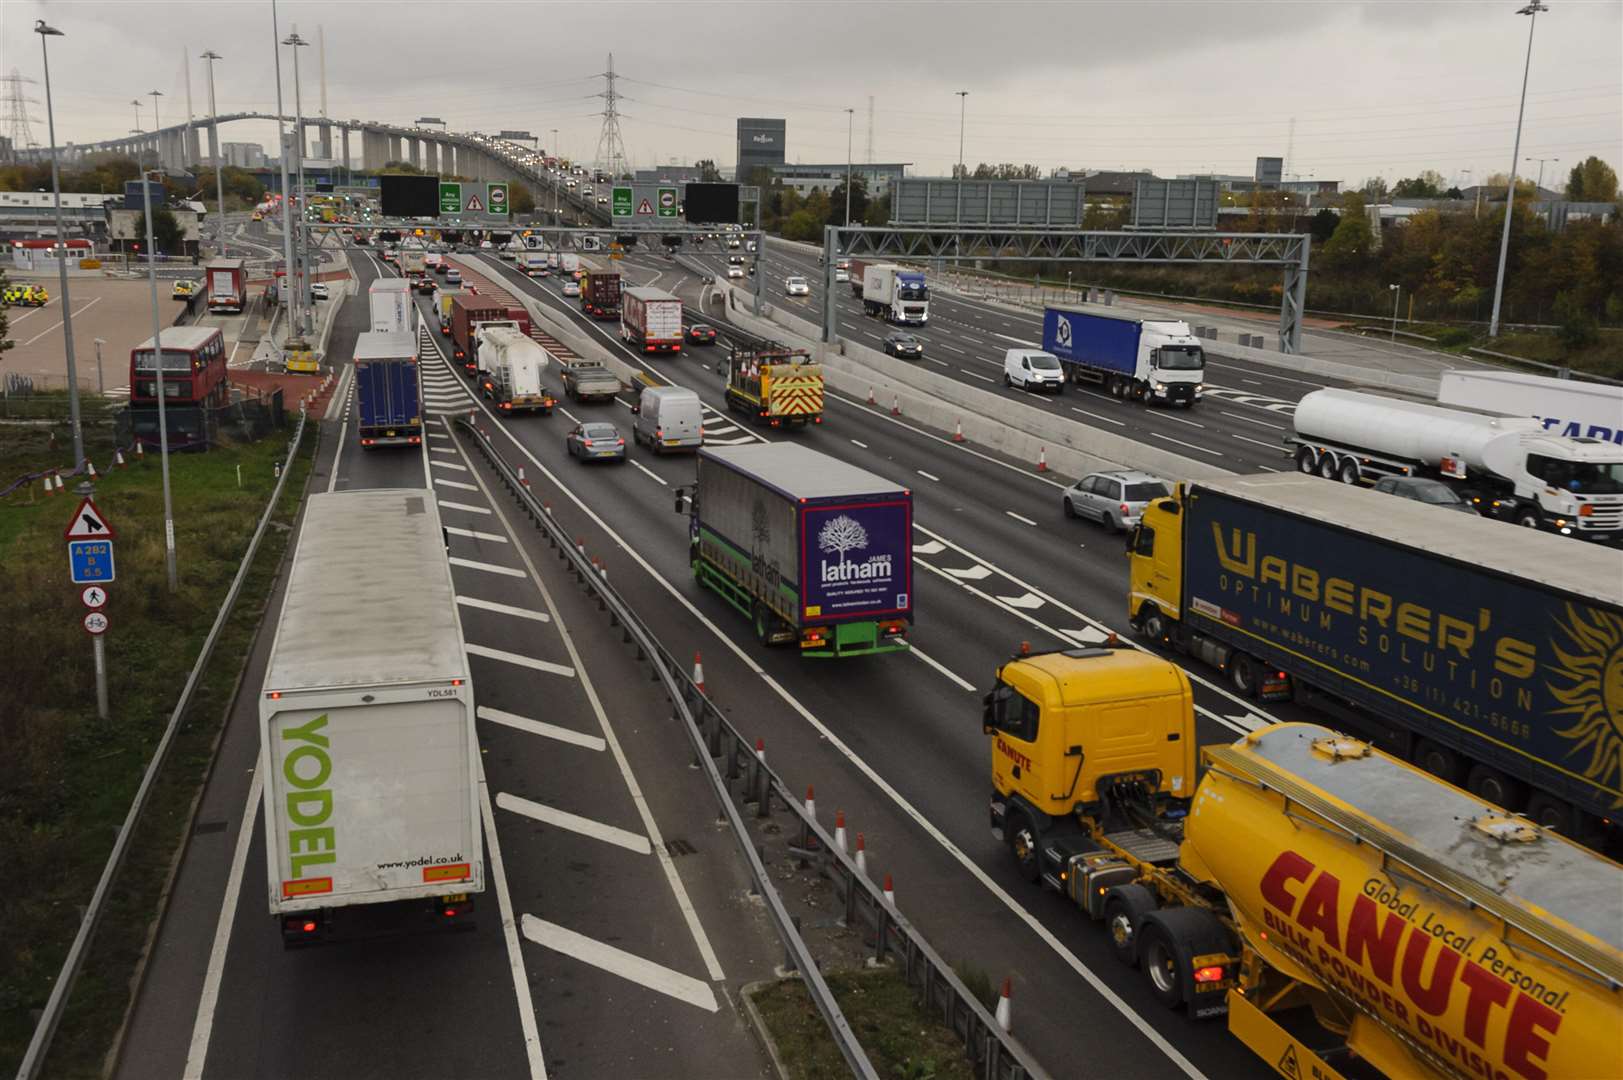 The Dartford Crossing has been hit by massive congestion throughout the day